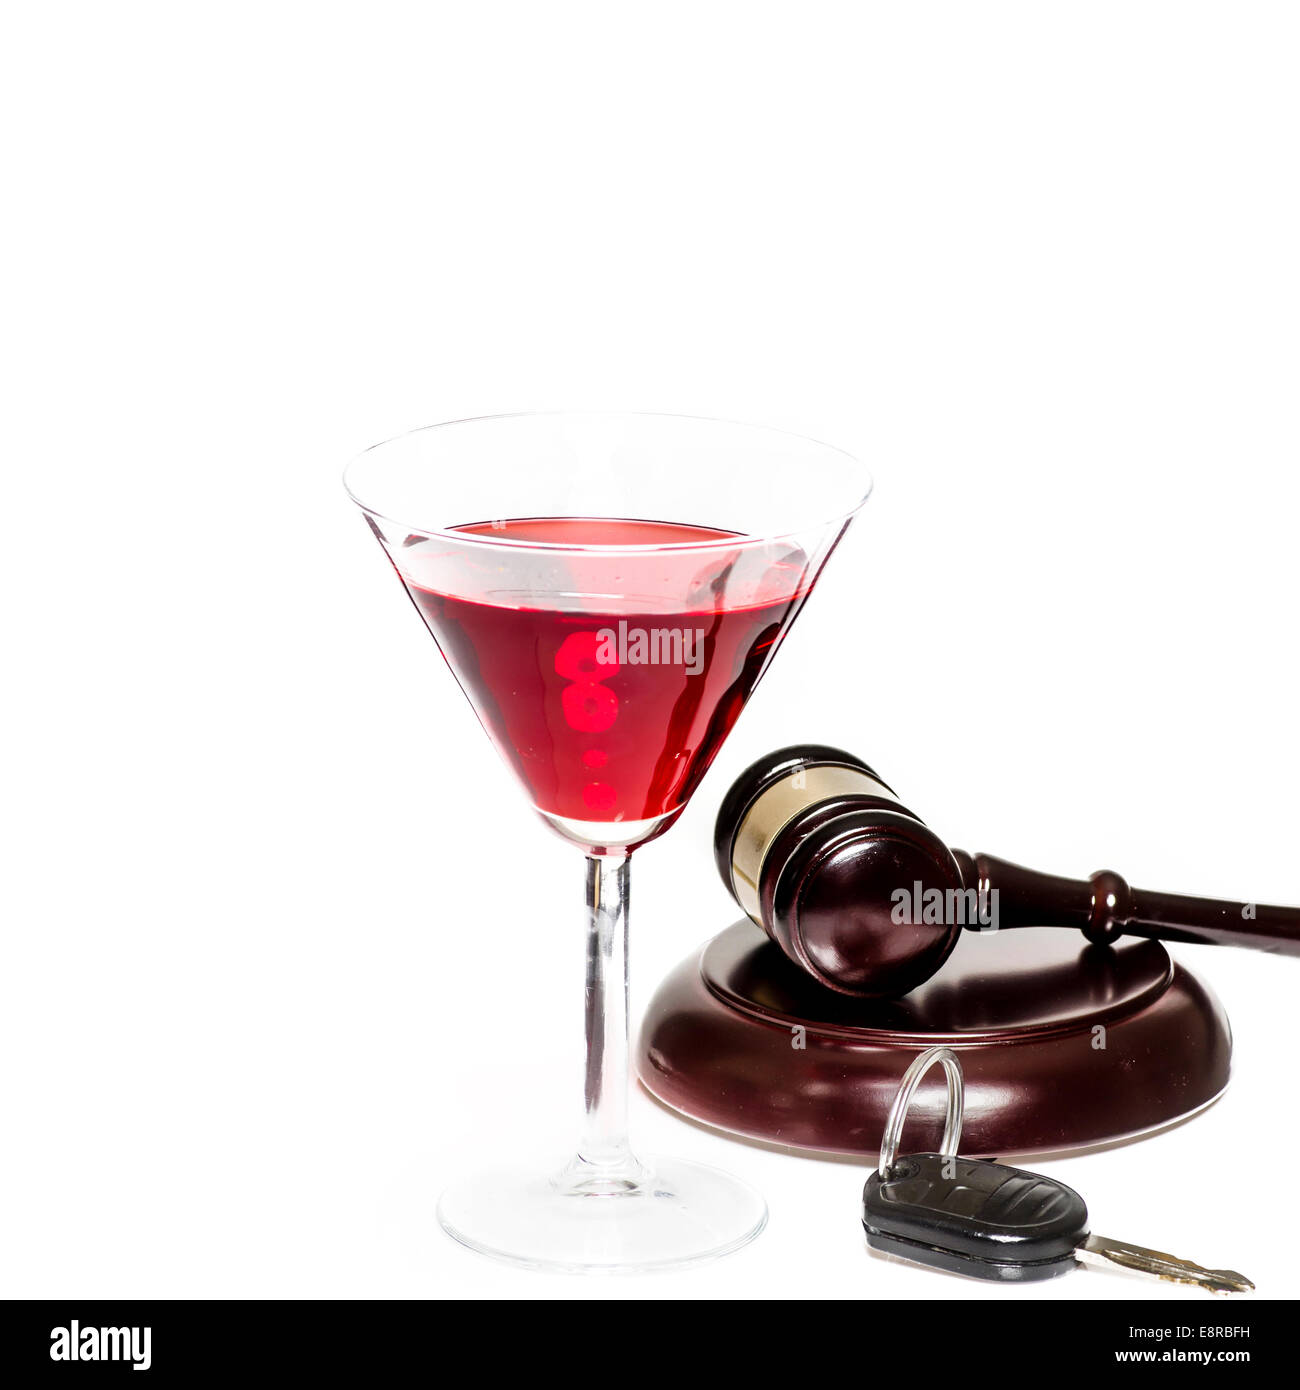 Drink driving, under influence of alcohol legal law concept image Stock Photo